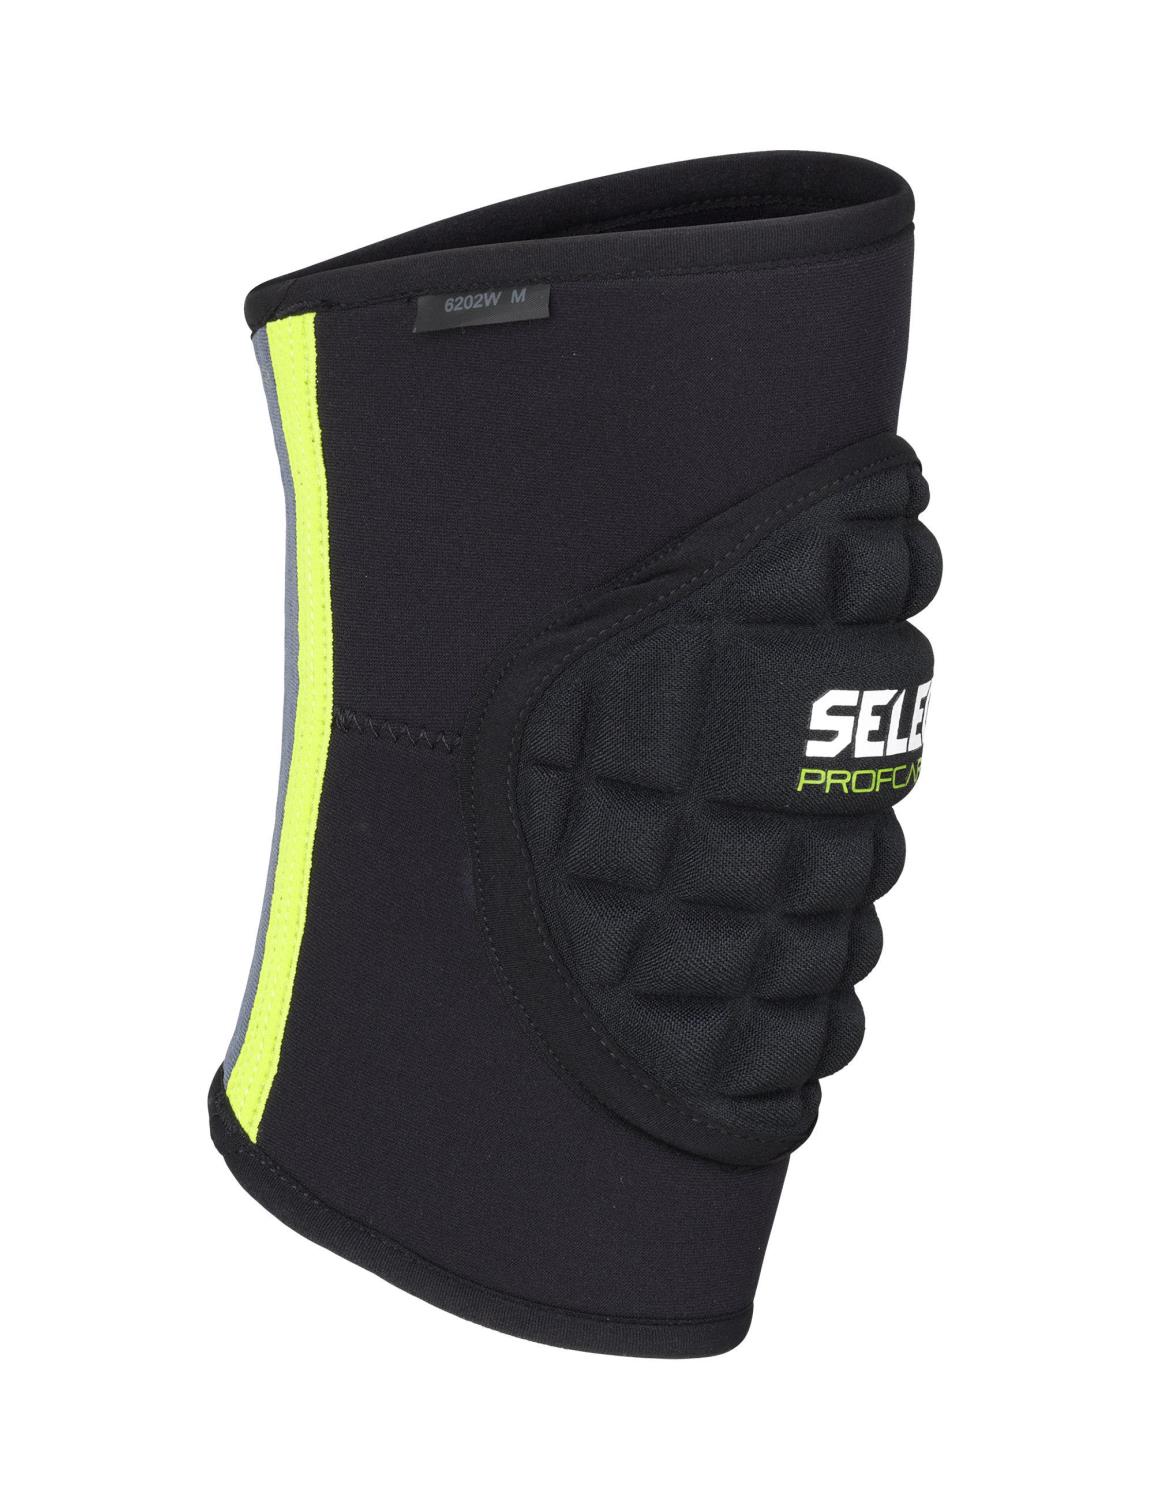 Select  Knee Support W/Pad 6202w